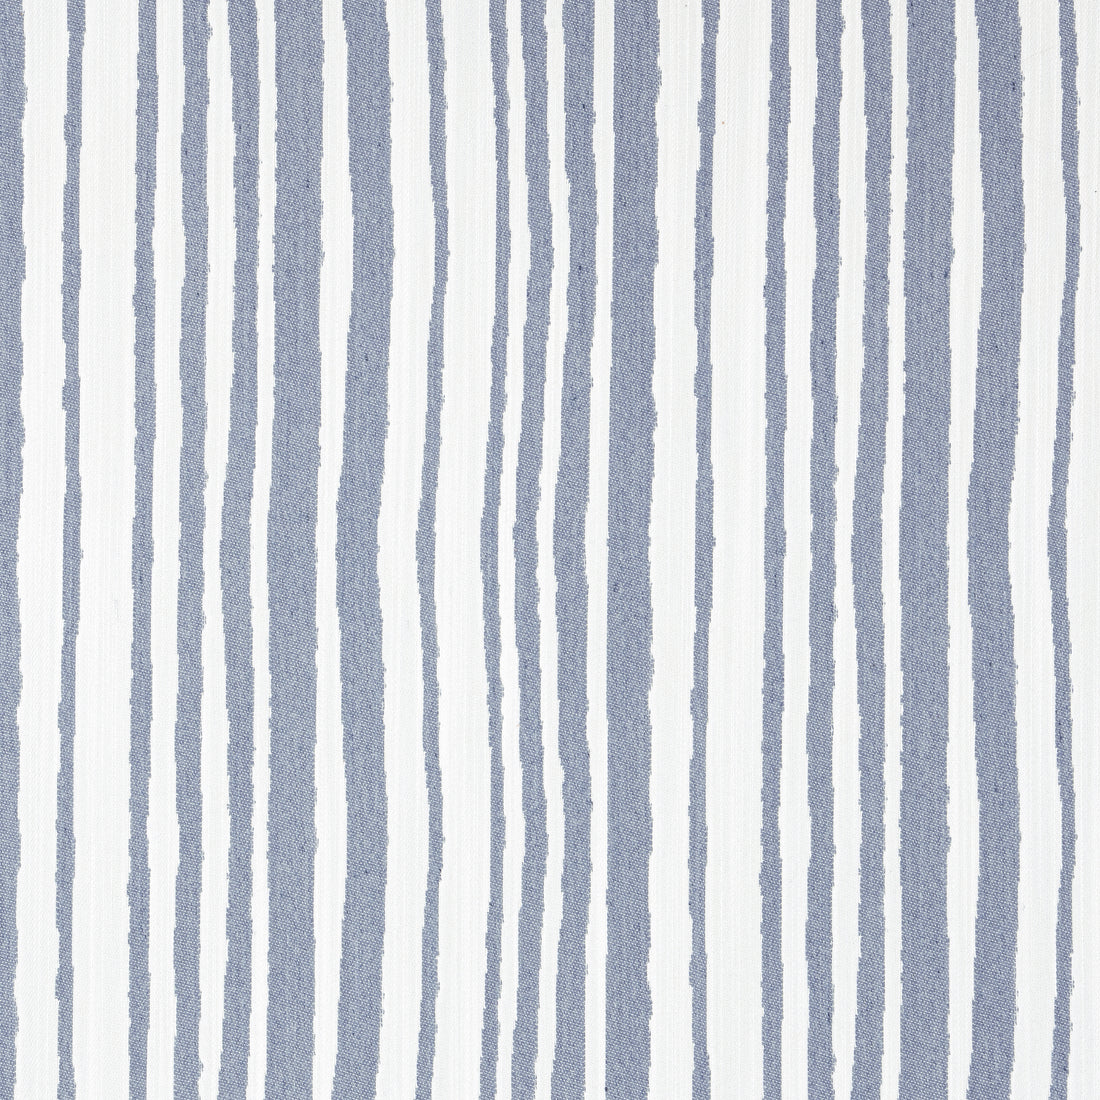 Pintado Stripe fabric in horizon color - pattern number W8503 - by Thibaut in the Villa collection